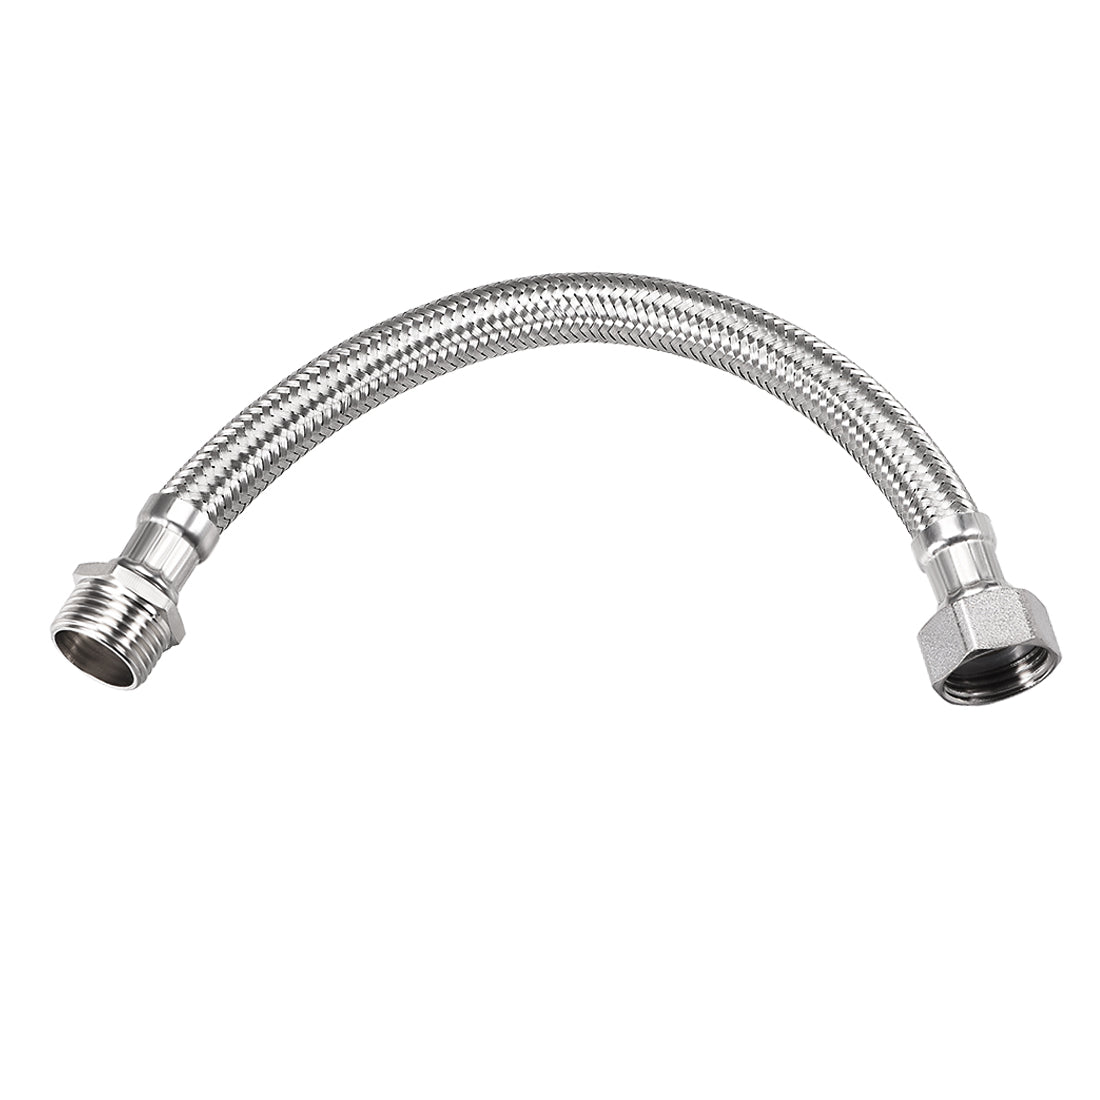 Uxcell Uxcell Faucet Supply Line Connector G1/2 Female x G1/2 Male 8" Long SUS304 Hose